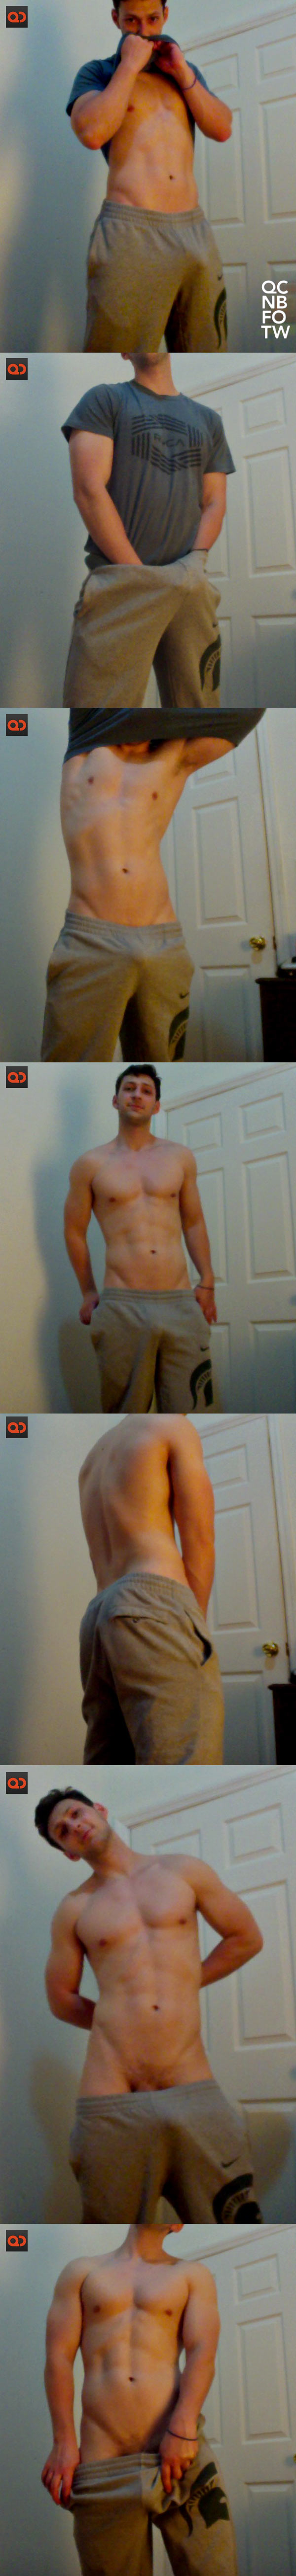 nude_bf_of_the_week-glasses_and_sweatpants-collage01